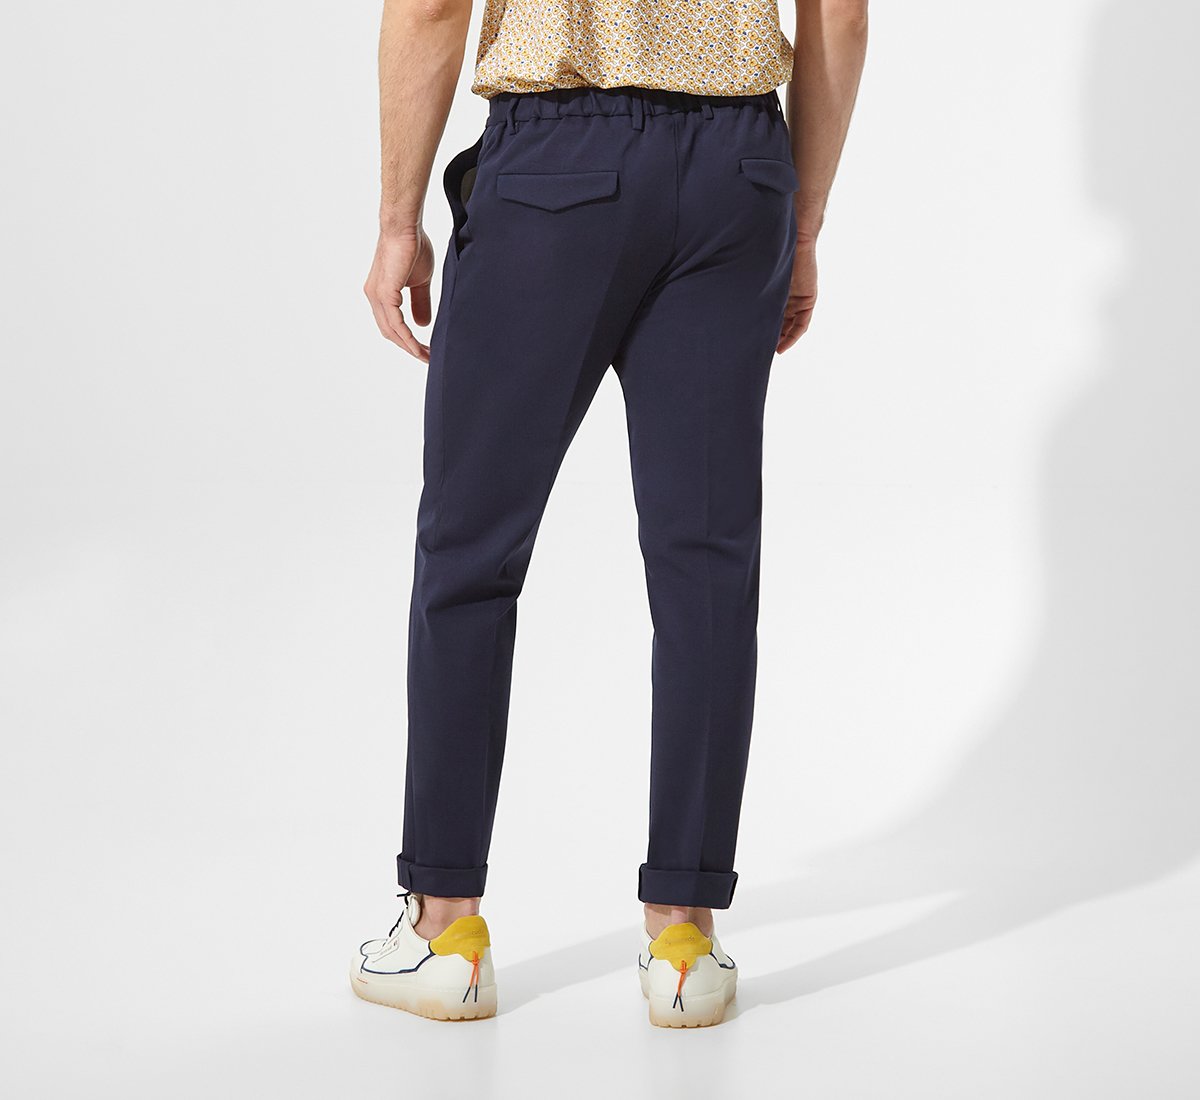 Structured blue trousers